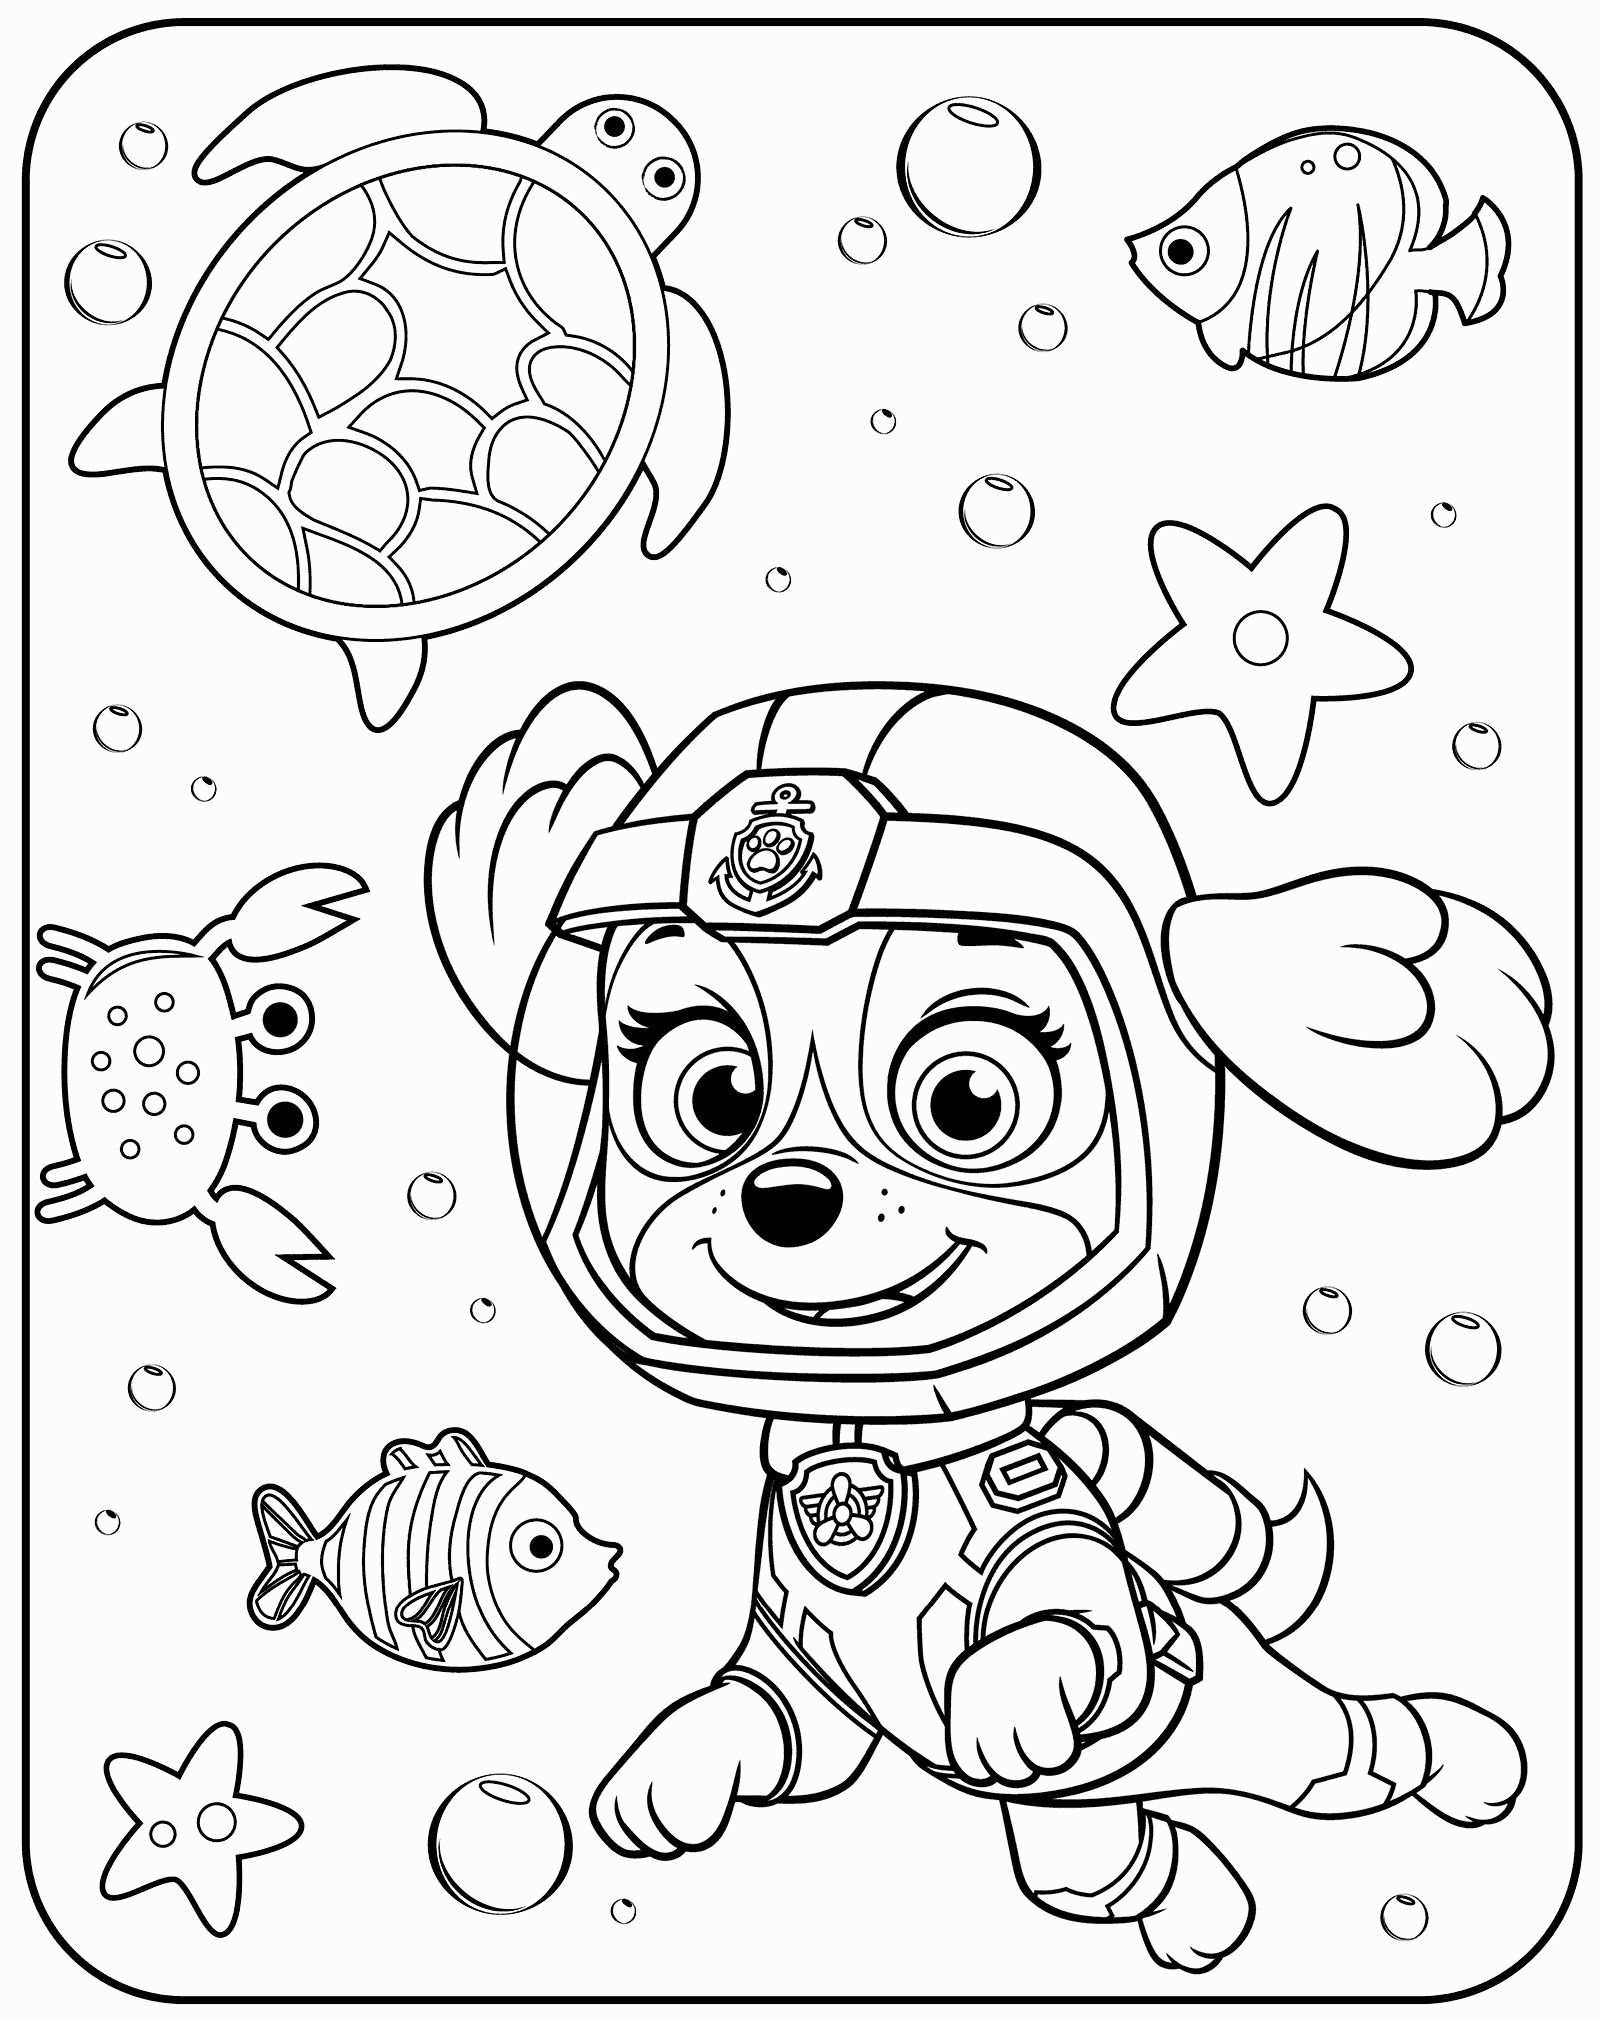 73 Awesome Photos Of Paw Patrol Coloring Sheets Paw Patrol